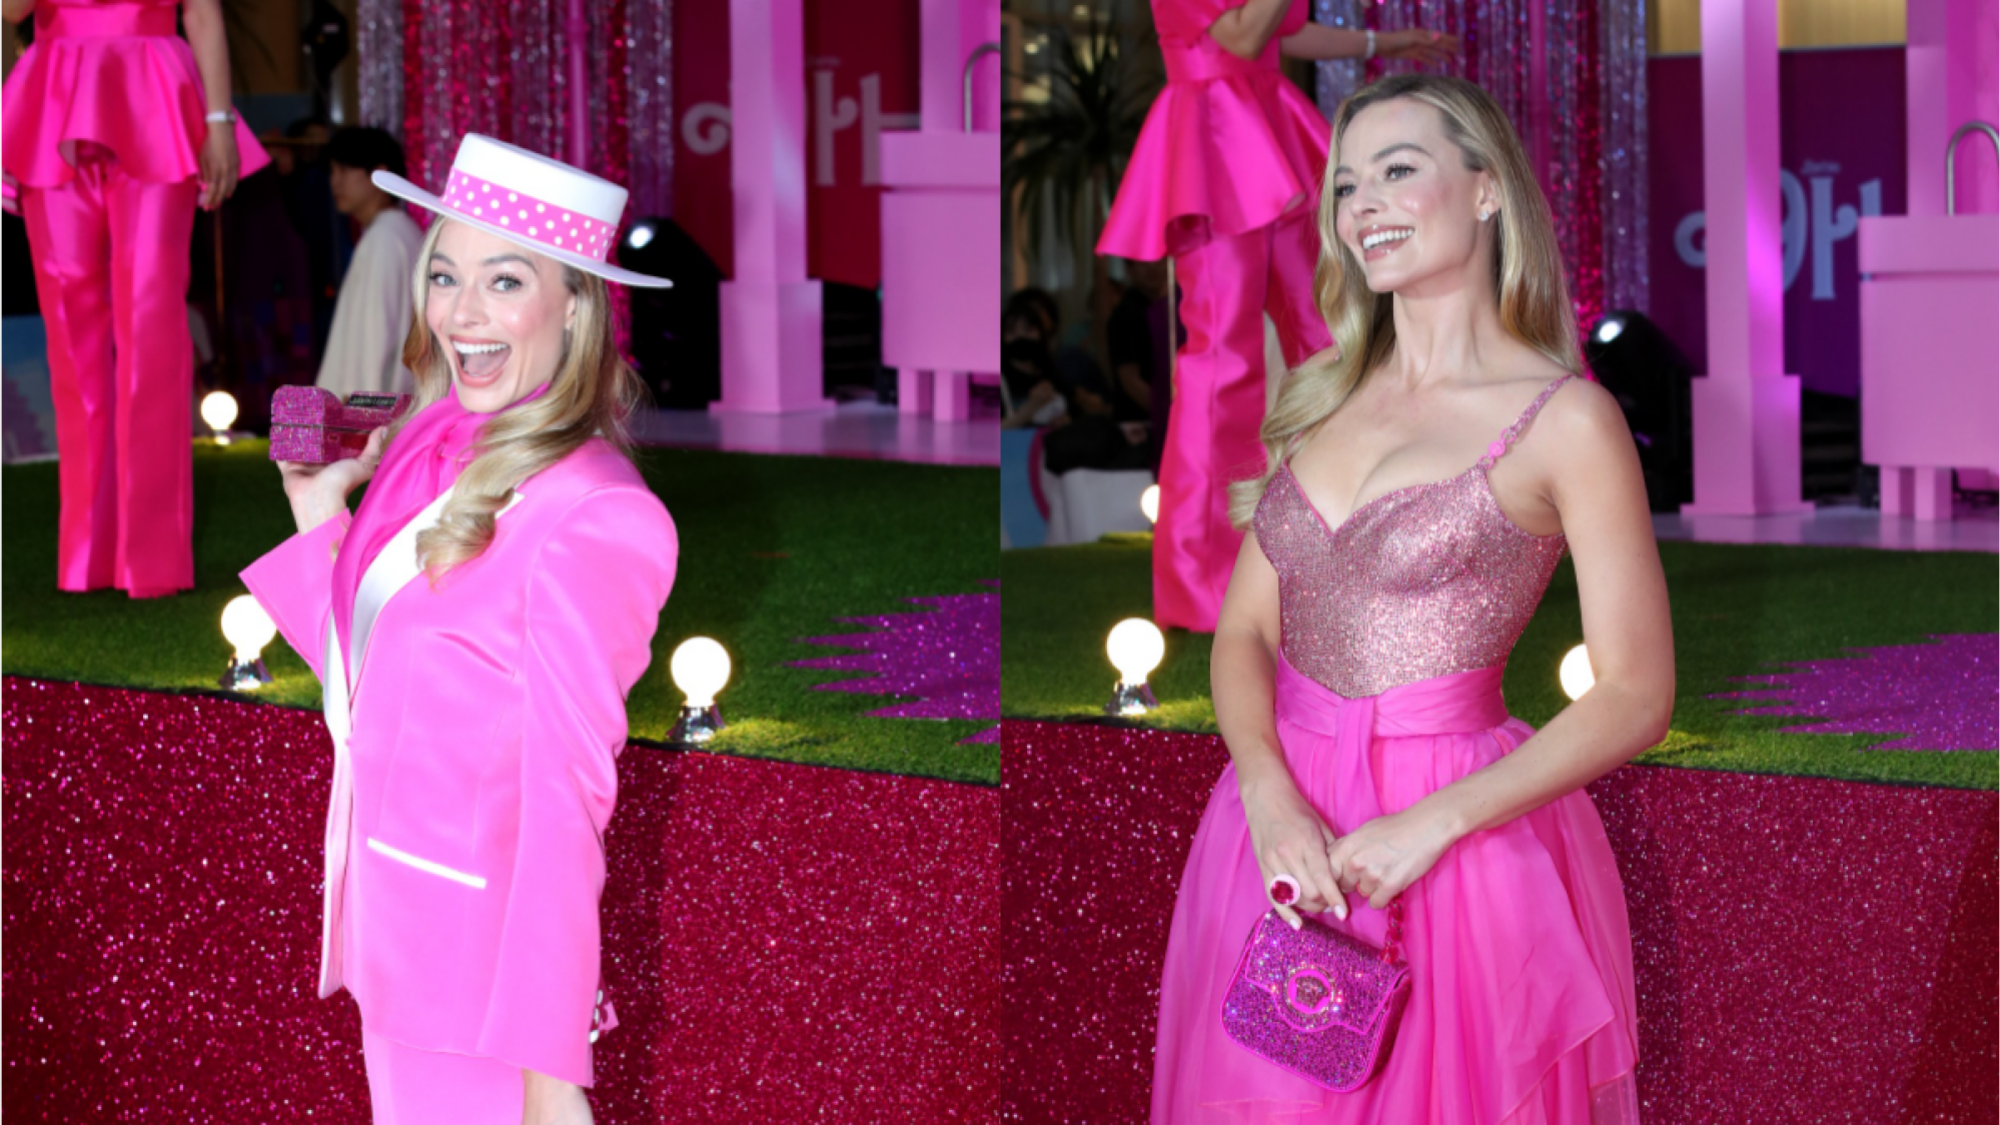 A side by side still of a woman wearing a pink suit and pink dress on a red carpet. 